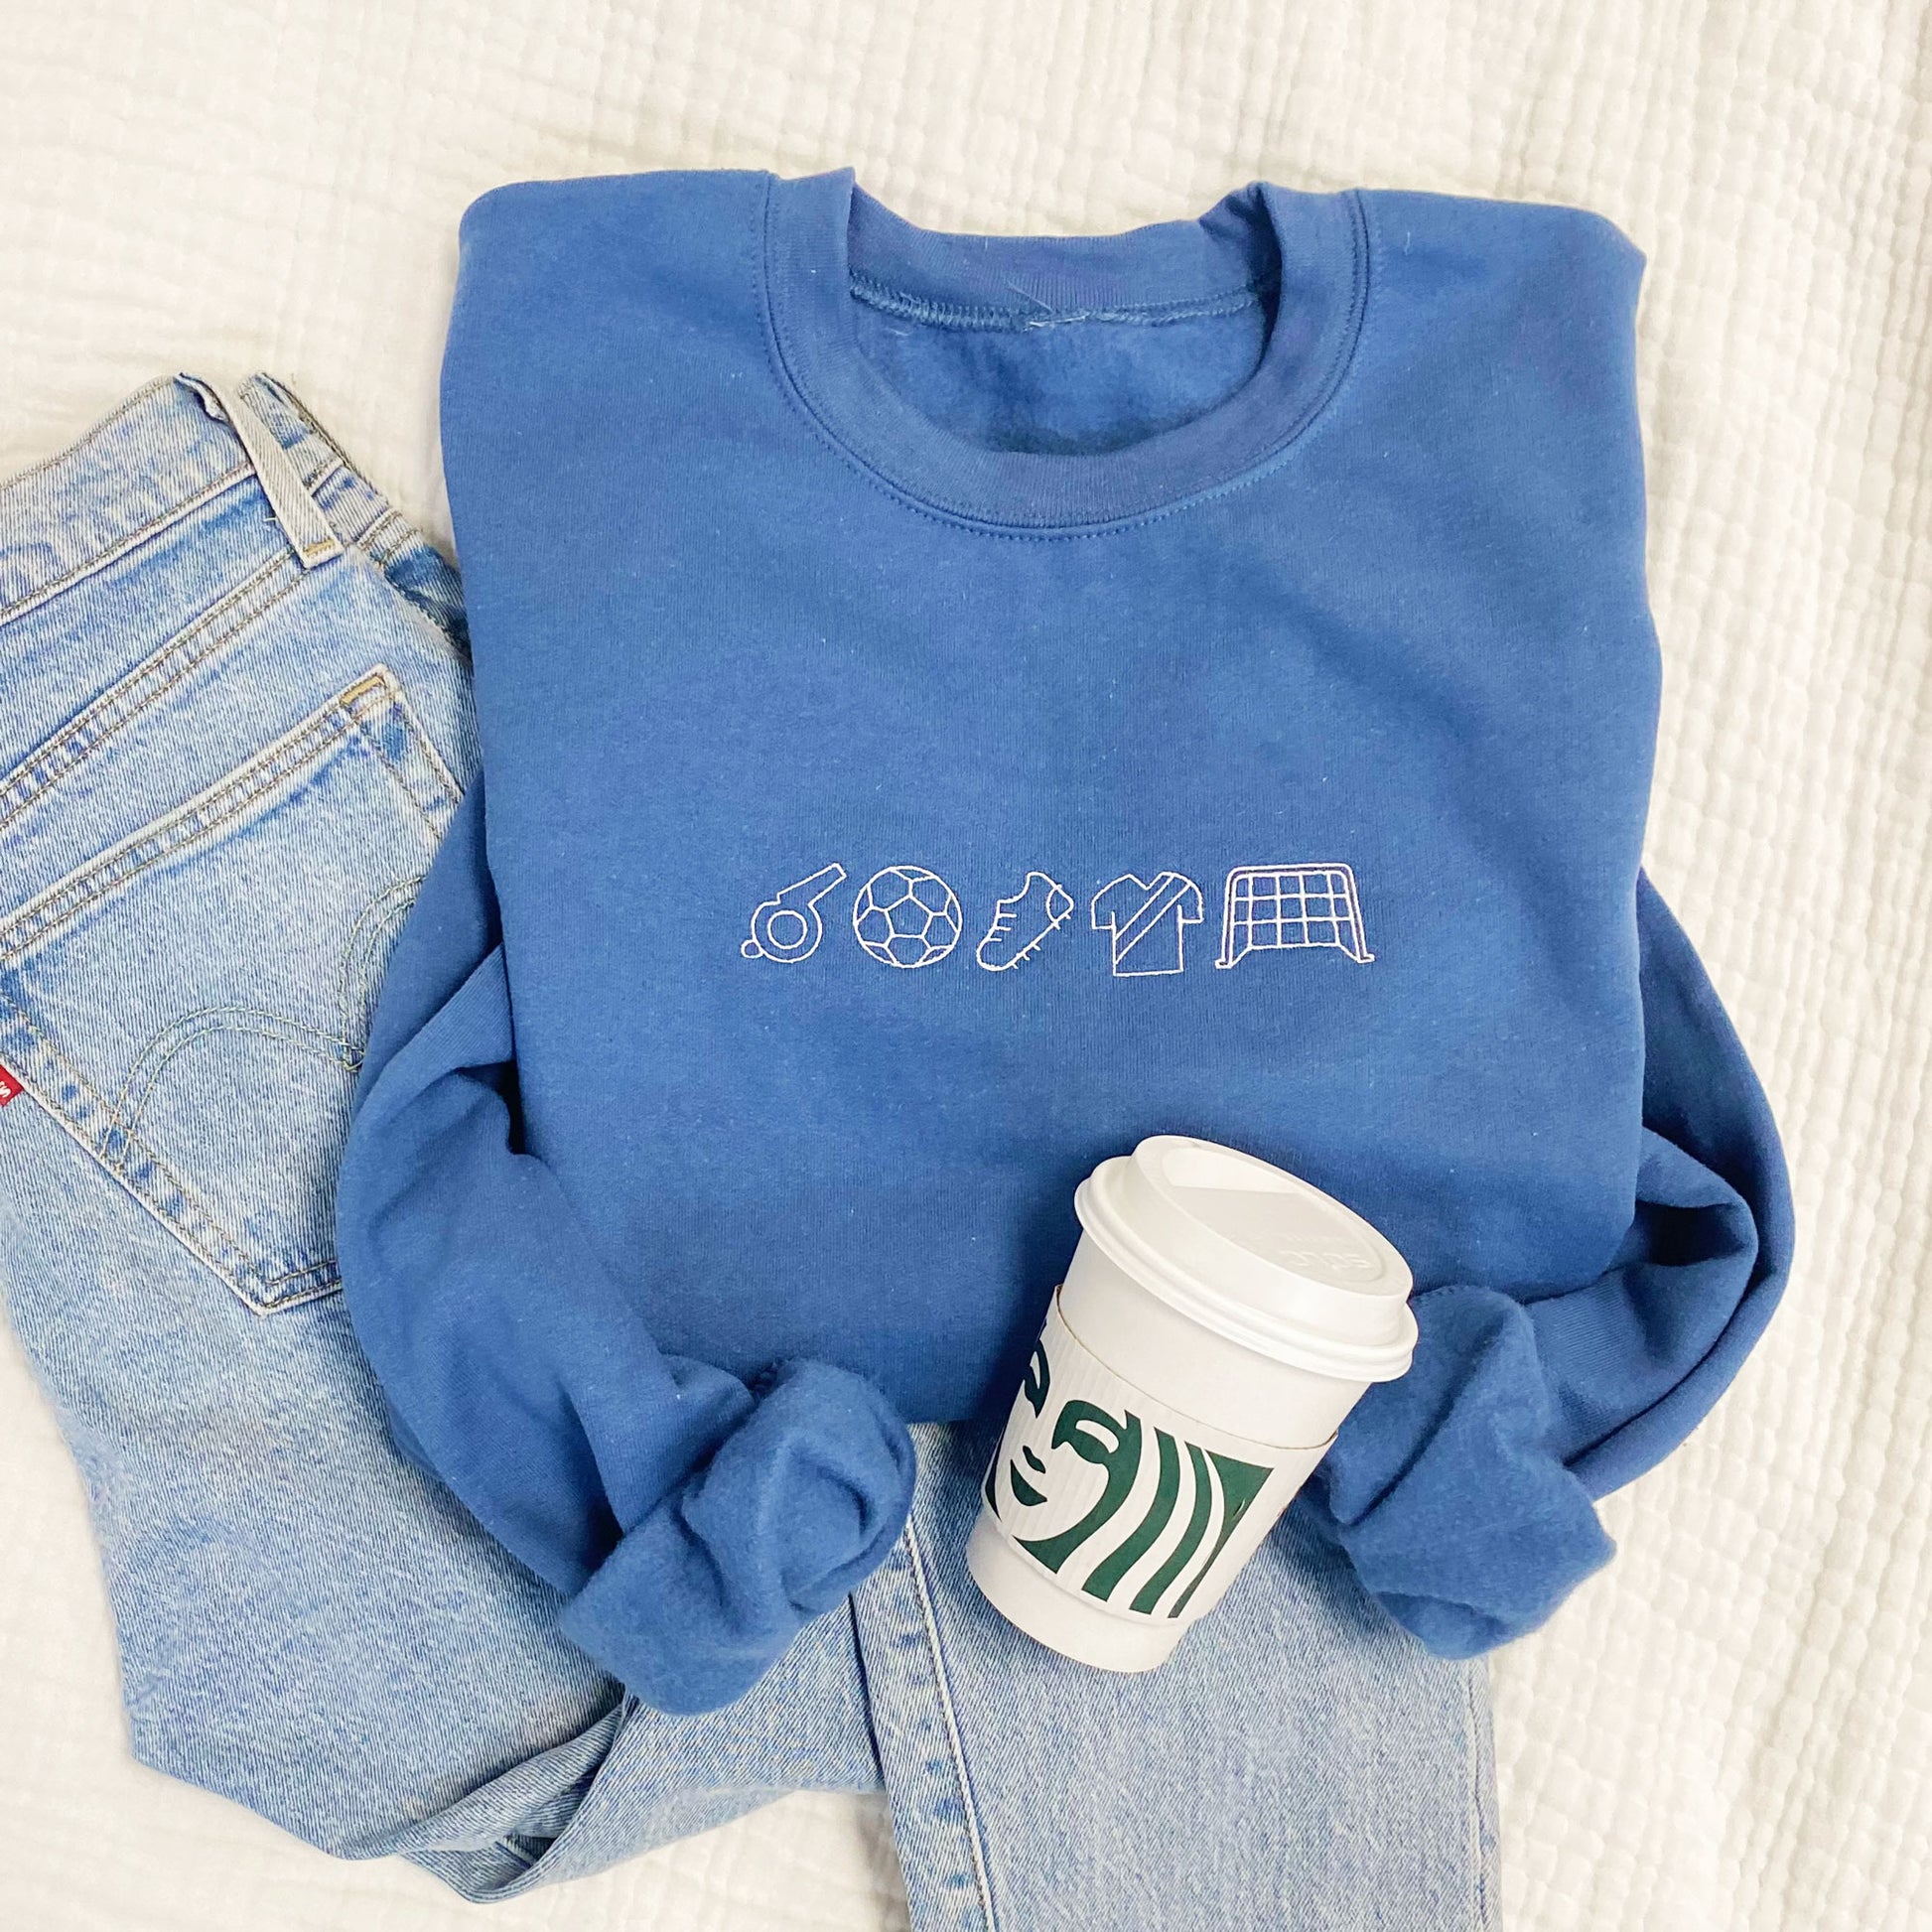 styled flat lay of indigo sweatshirt with jeans and a starbucks cup. the sweatshirt features white soccer icons embroidered across the chest